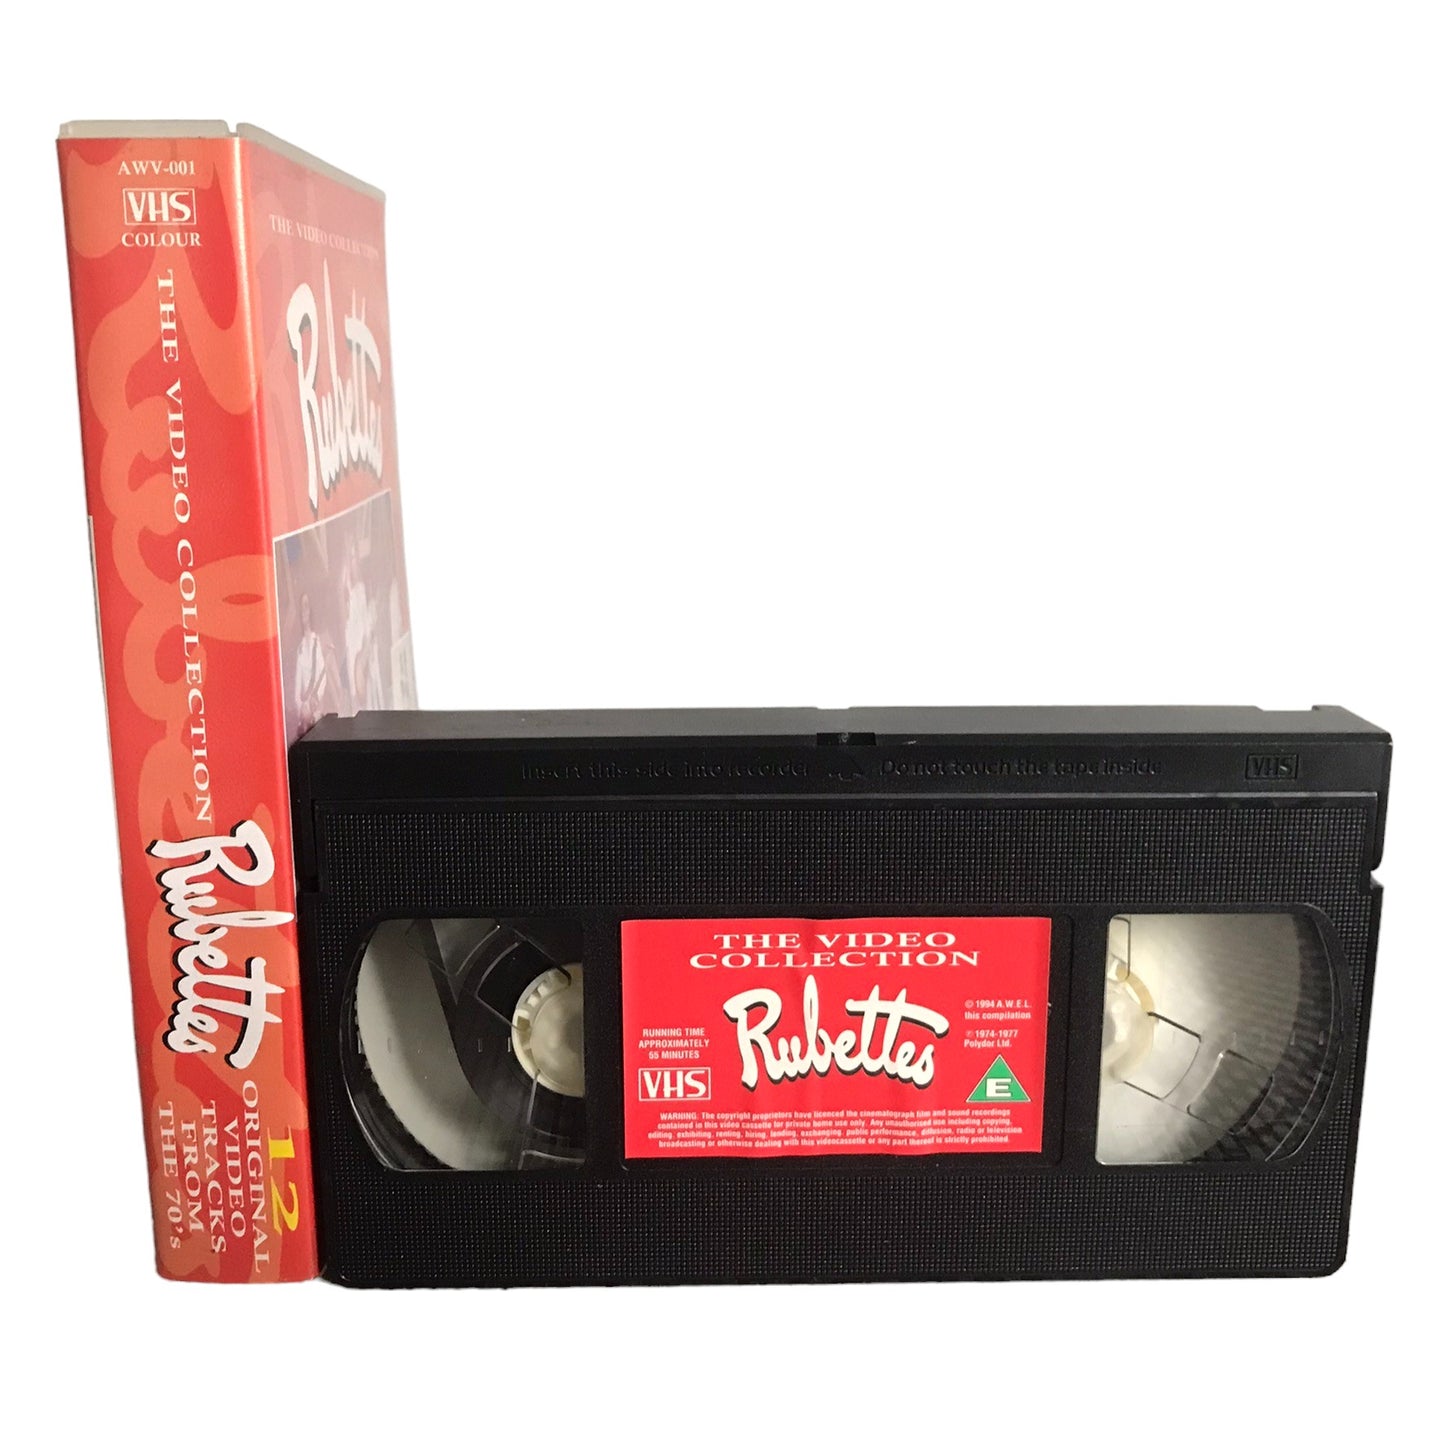 Rubettes - 12 Original Video Tracks - The Video Collection - Music - Pal - VHS-